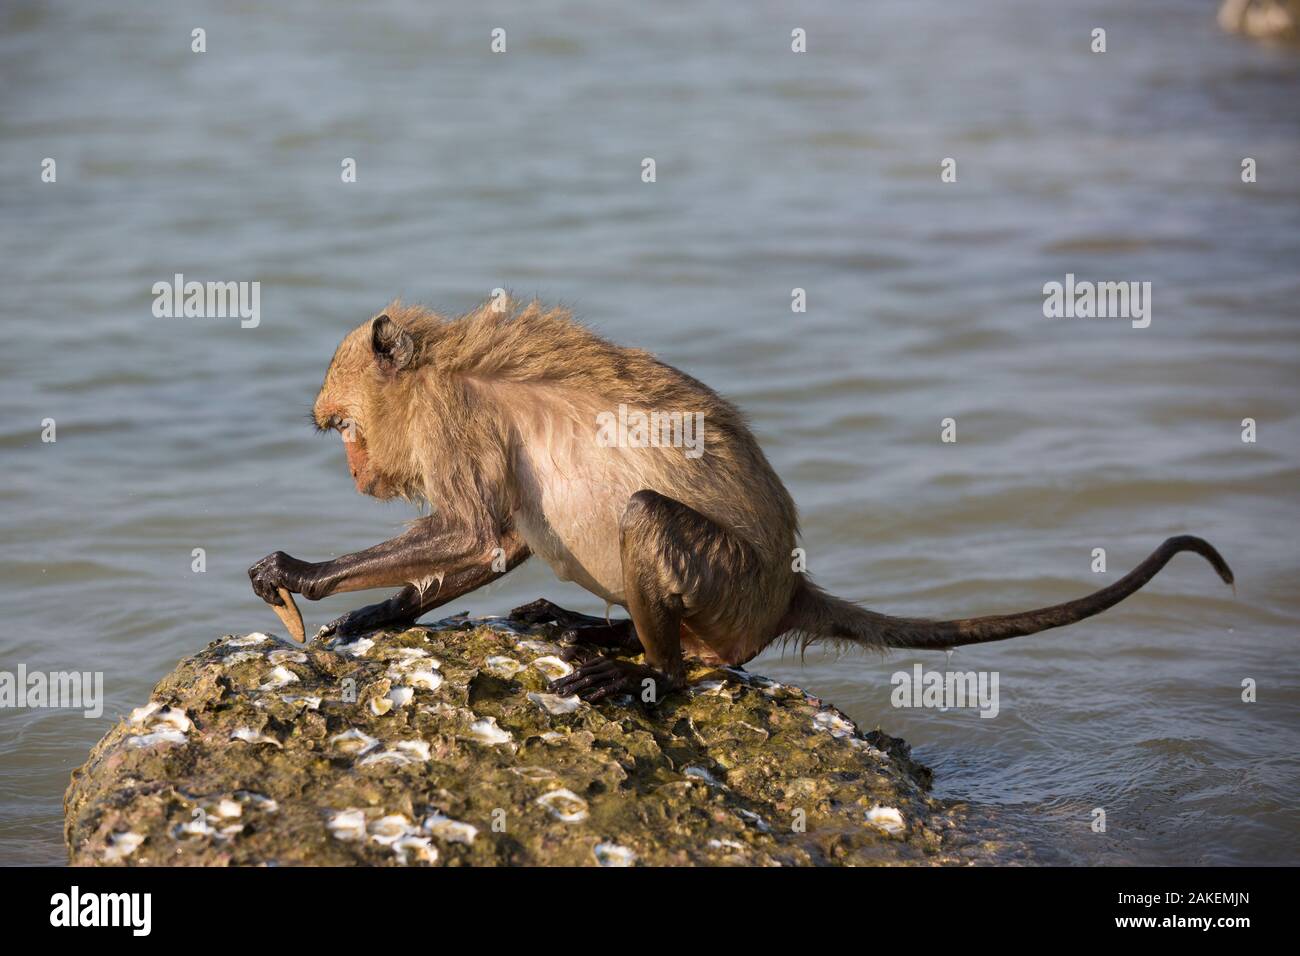 Long-tailed macaque (Macaca fascicularis) using stone to break open oysters. Koram island, Khao Sam Roi Yot National Park, Thailand. Stock Photo